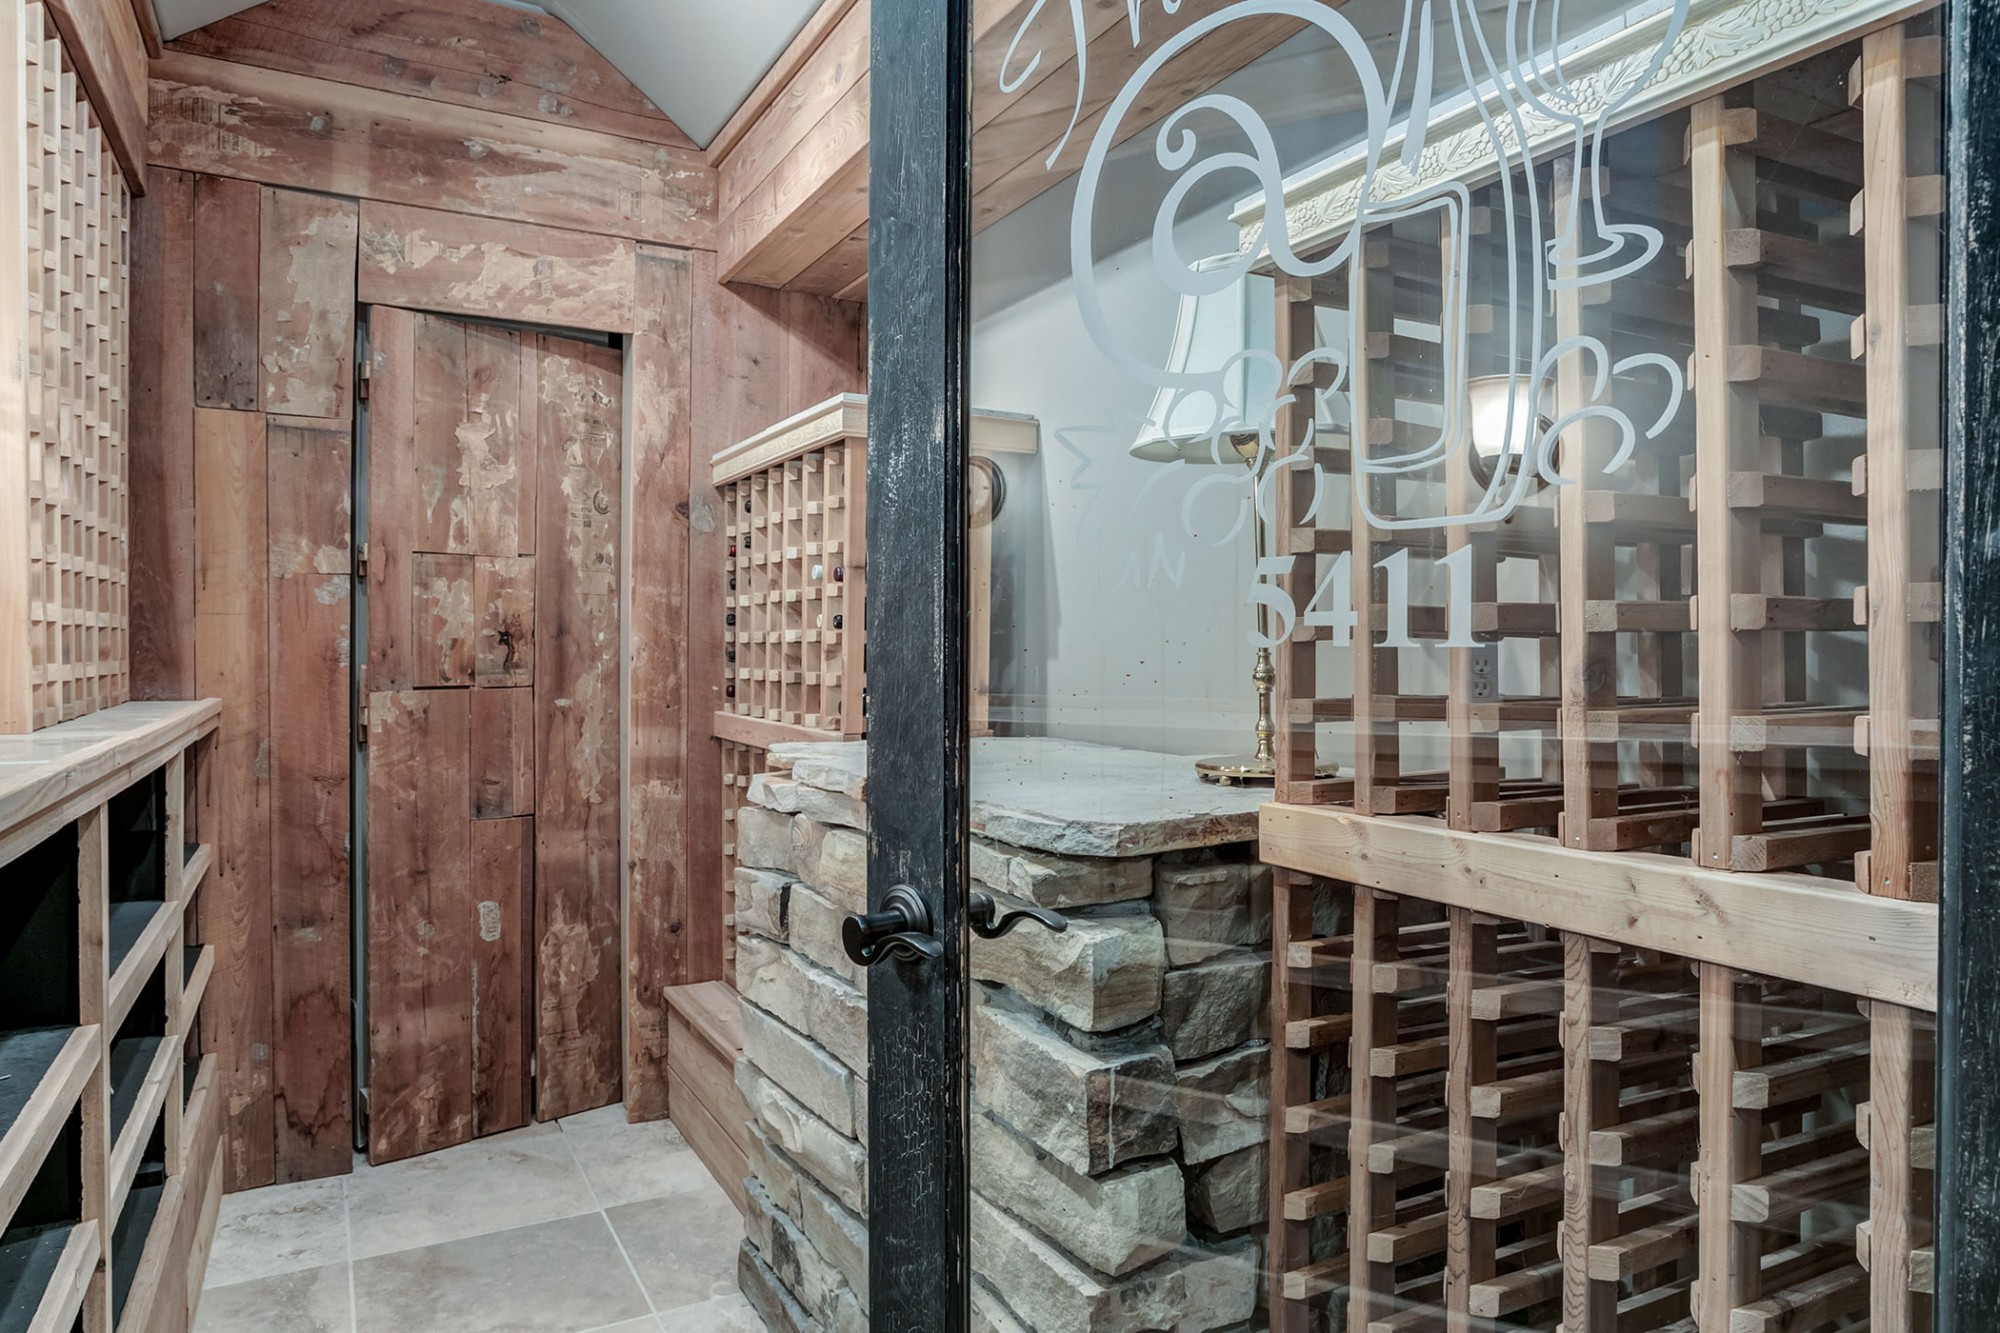 Enter through the custom etched door. The wine cellar can hold approximately 450 bottles, and there is also a hidden door leading to the tornado room!